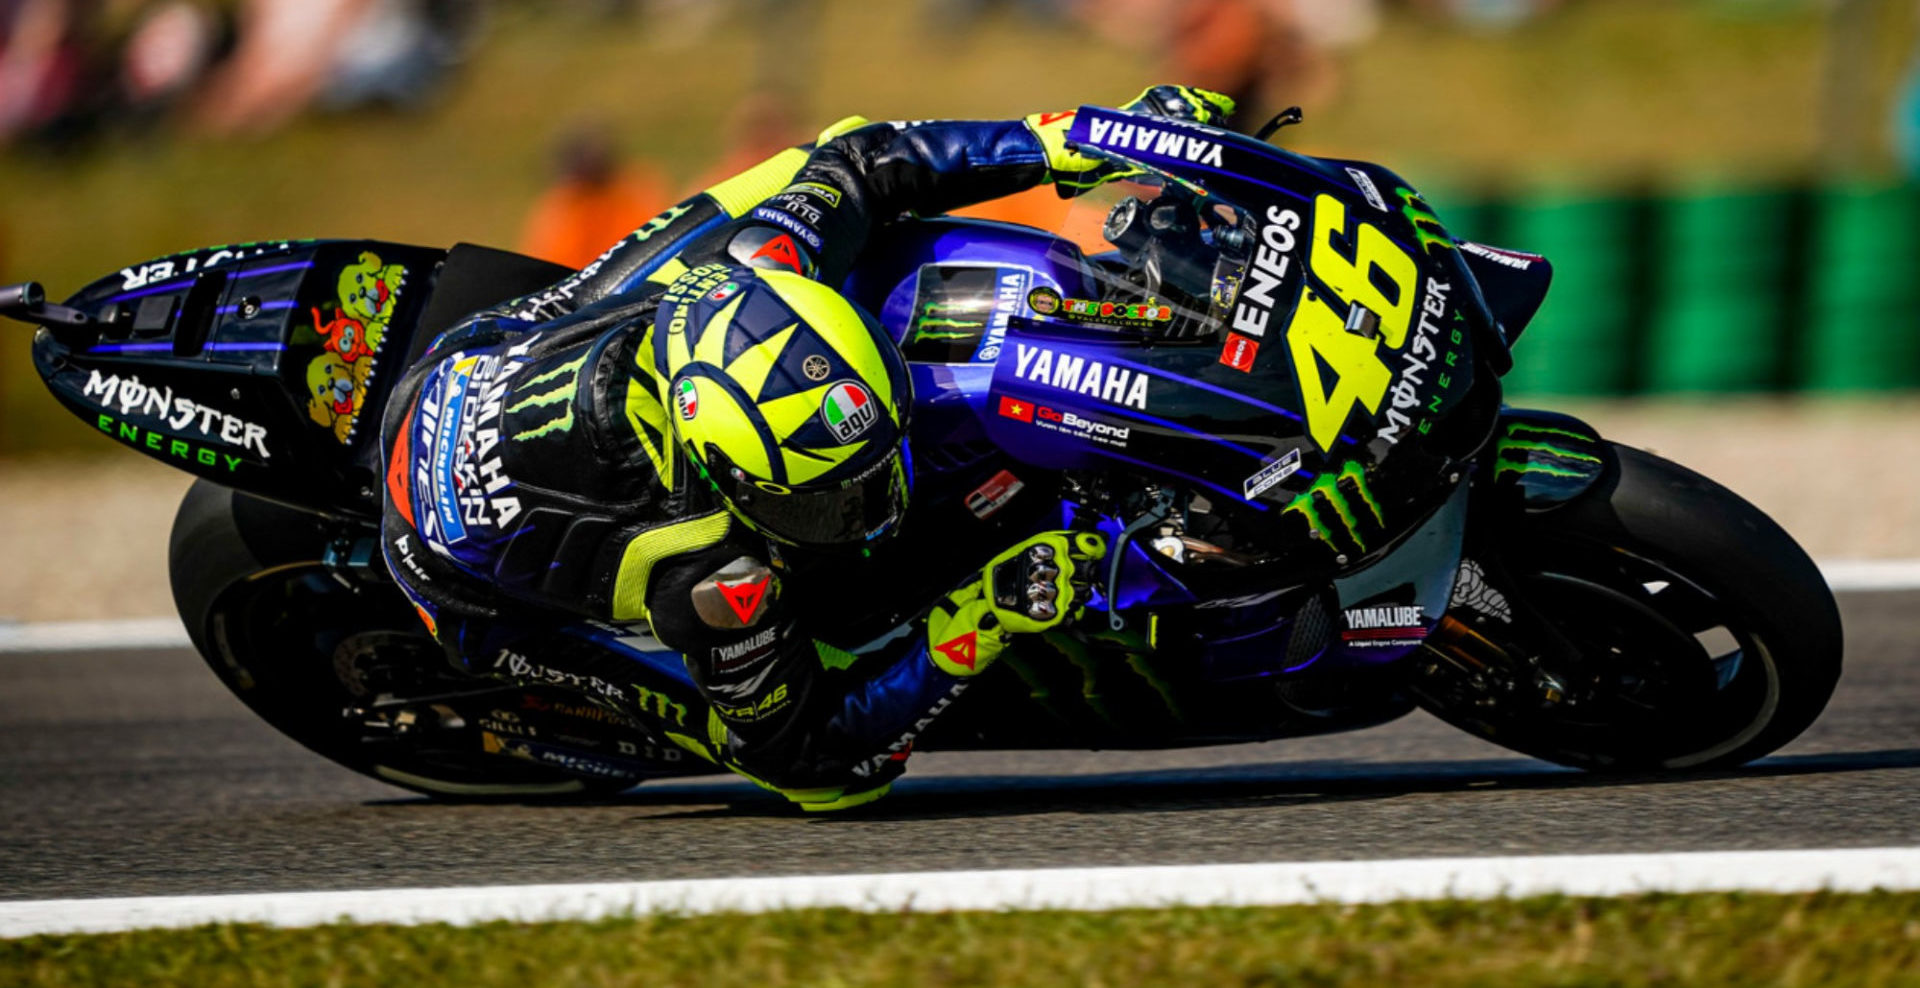 MotoGP: Monster Energy Yamaha Team Talks About The Fans At Misano ...